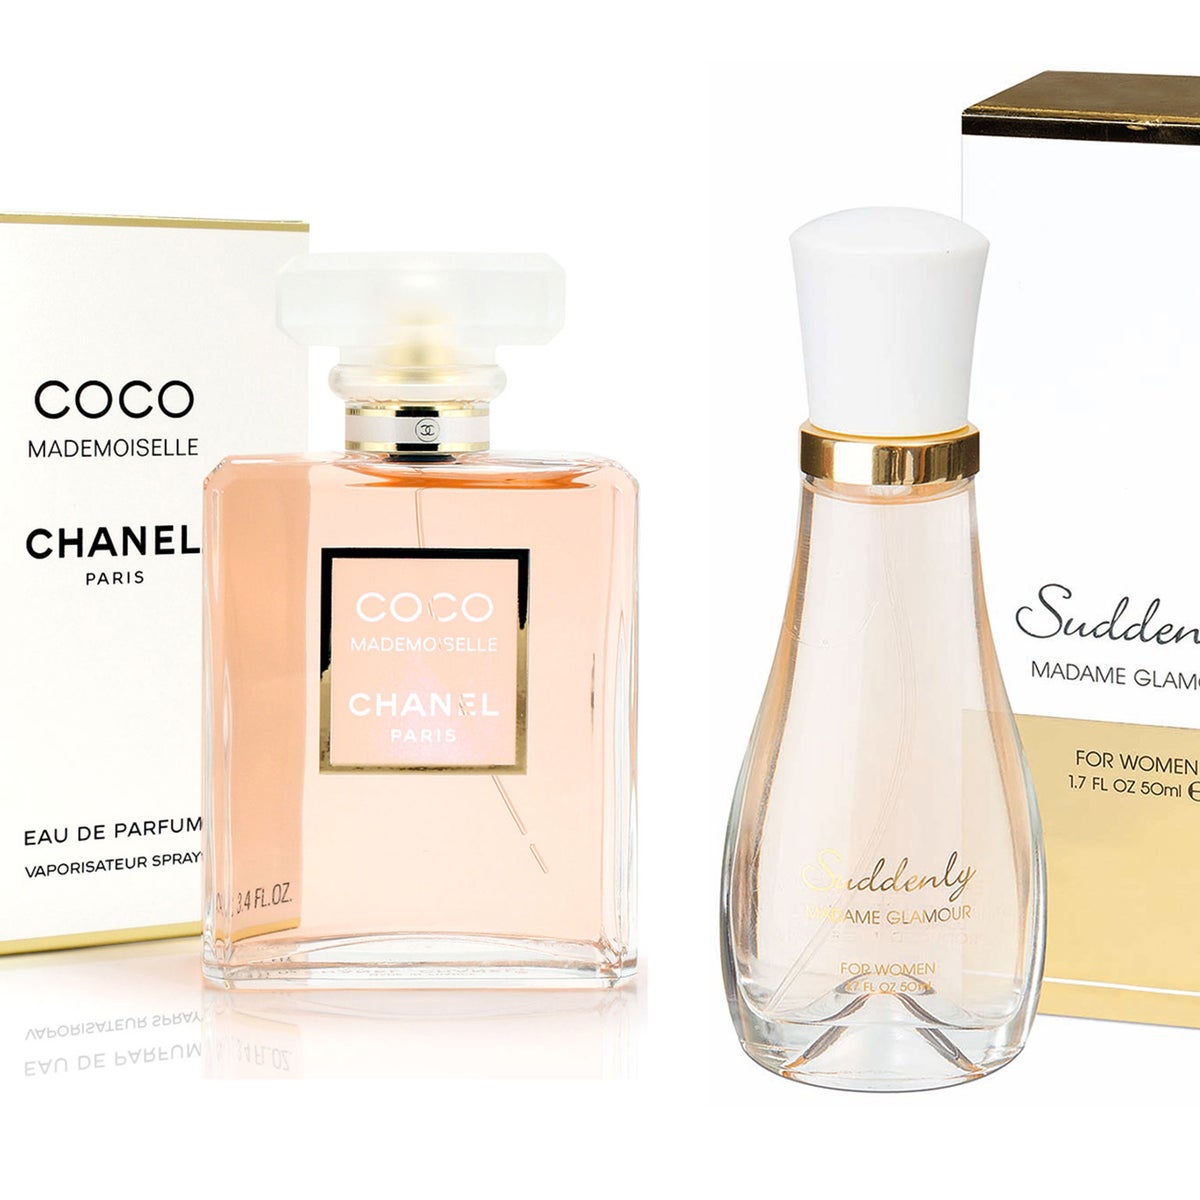 Revealed: Lidl's £4 perfume smells identical to Chanel's £70 scent